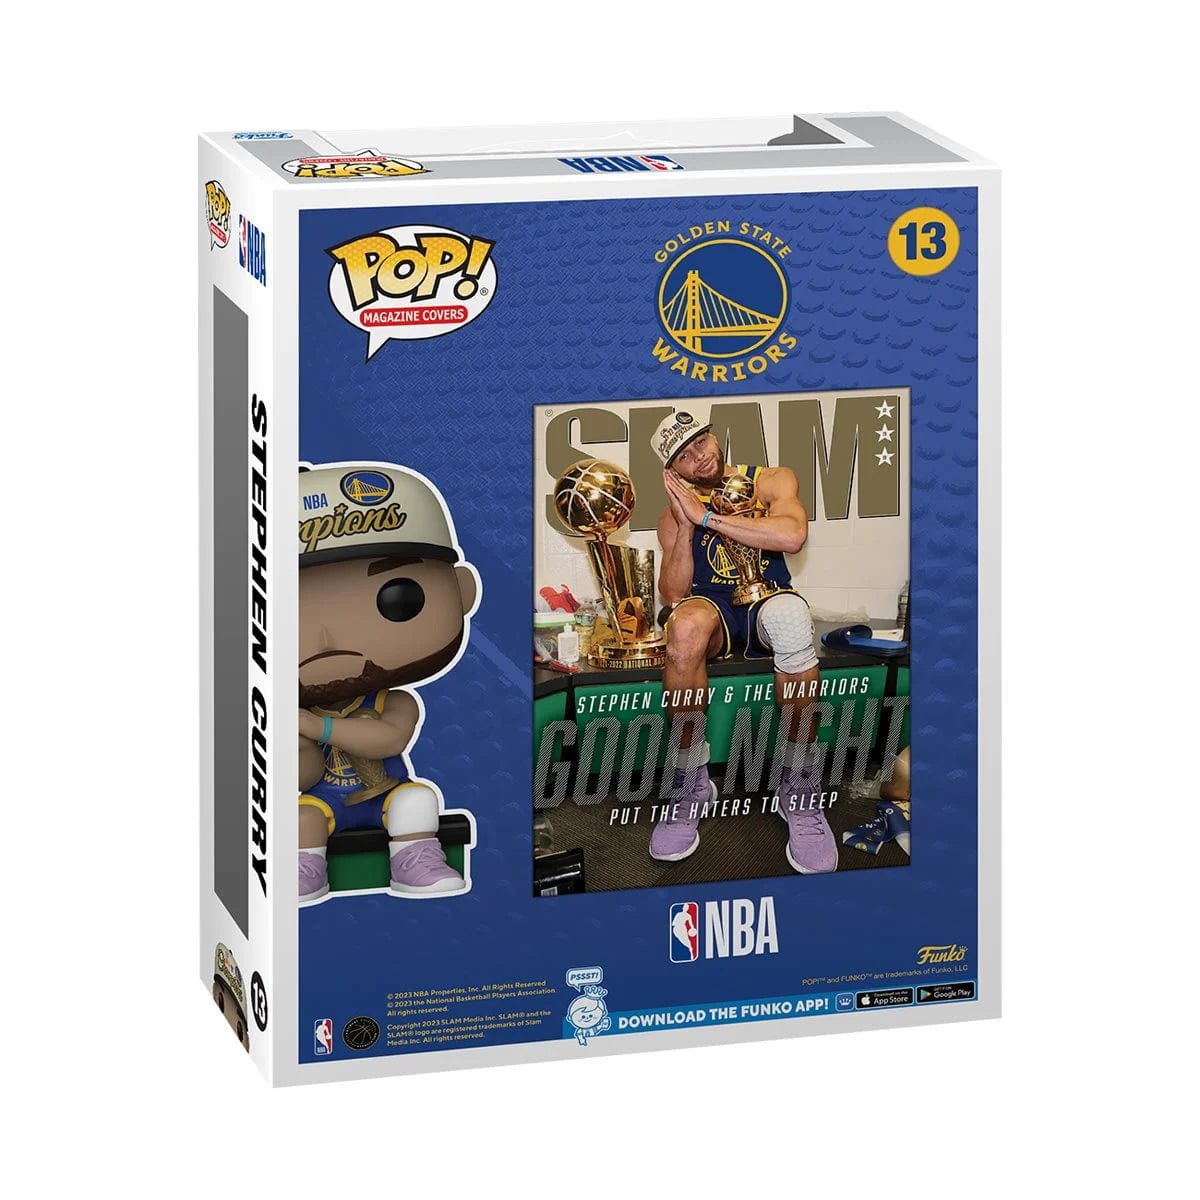 NBA-SLAM-Stephen-Curry-Funko-Pop-Cover-Figure-13-with-Case-Collectable-Vinyl-Figure-Gift-Idea-Official-Merchandise-Toys-For-Kids-&-Adults-Sports-Fans-Box-Art